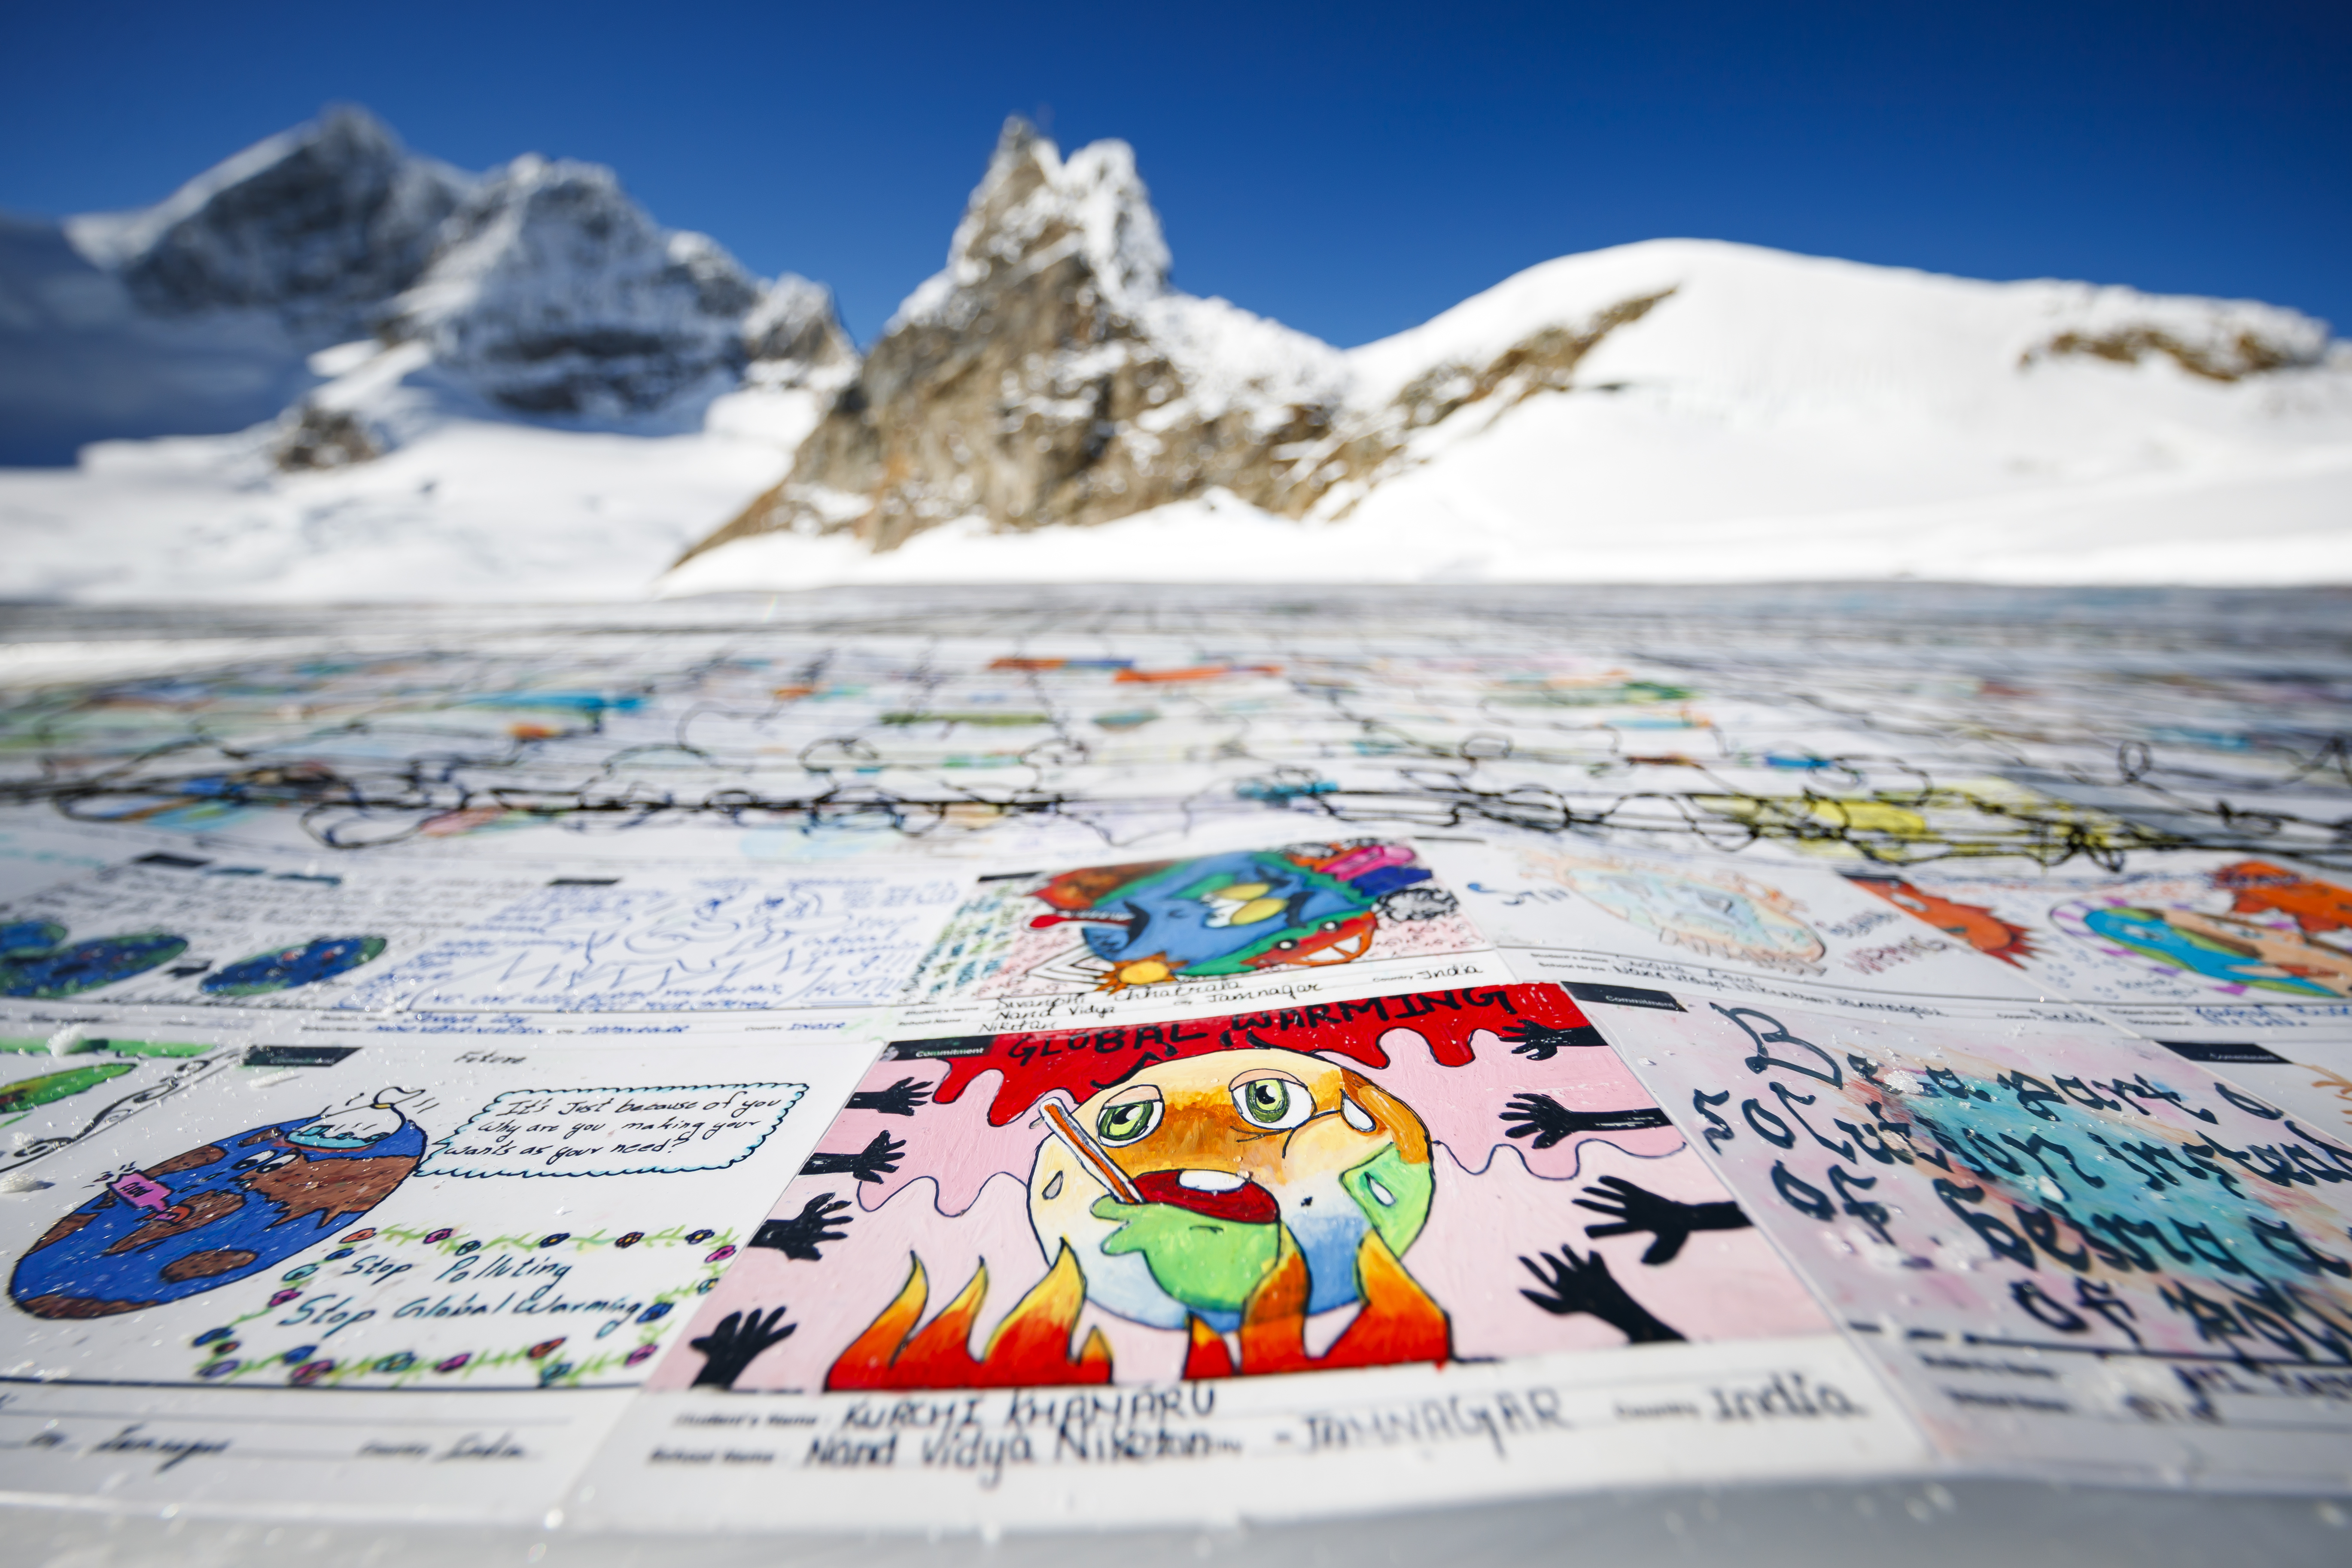 A giant postcard of approximately 2500 square meters made of contributions from over 125'000 individual postcards containing messages aiming to fight climate change and global warming, is pictured on the Aletsch glacier near the Jungfraujoch saddle by the Jungfrau peak, in Switzerland, Friday, November 16, 2018. Each individual postcard includes climate change promises and messages from children and youth originating from 35 countries over the world and aims to establish the Guinness world record of the largest composed postcard with the most overall contributors. The 1.5 degrees Celcius written in the center of the postcard refers to a target of limiting global warming to 1.5°C. (Valentin Flauraud/Keystone via AP)